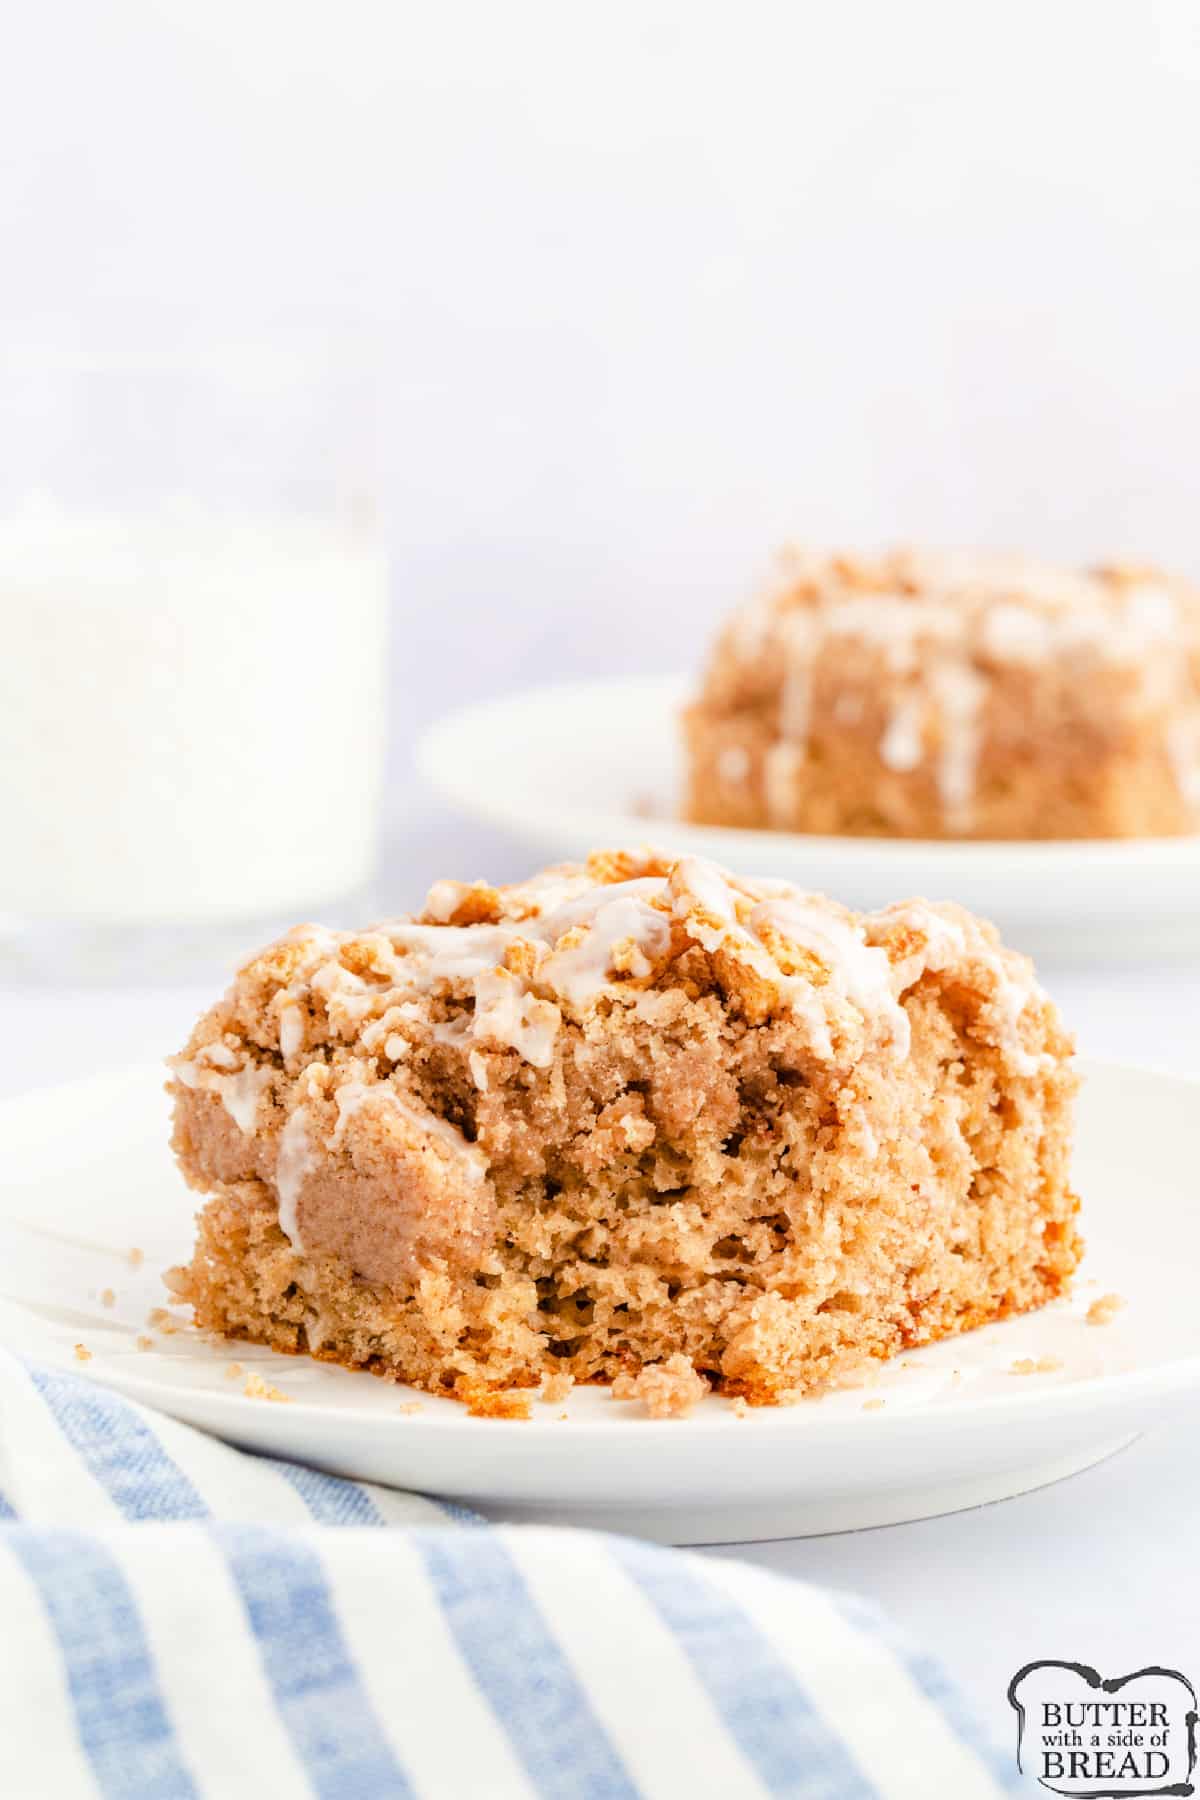 Crumb cake with cinnamon streusel topping